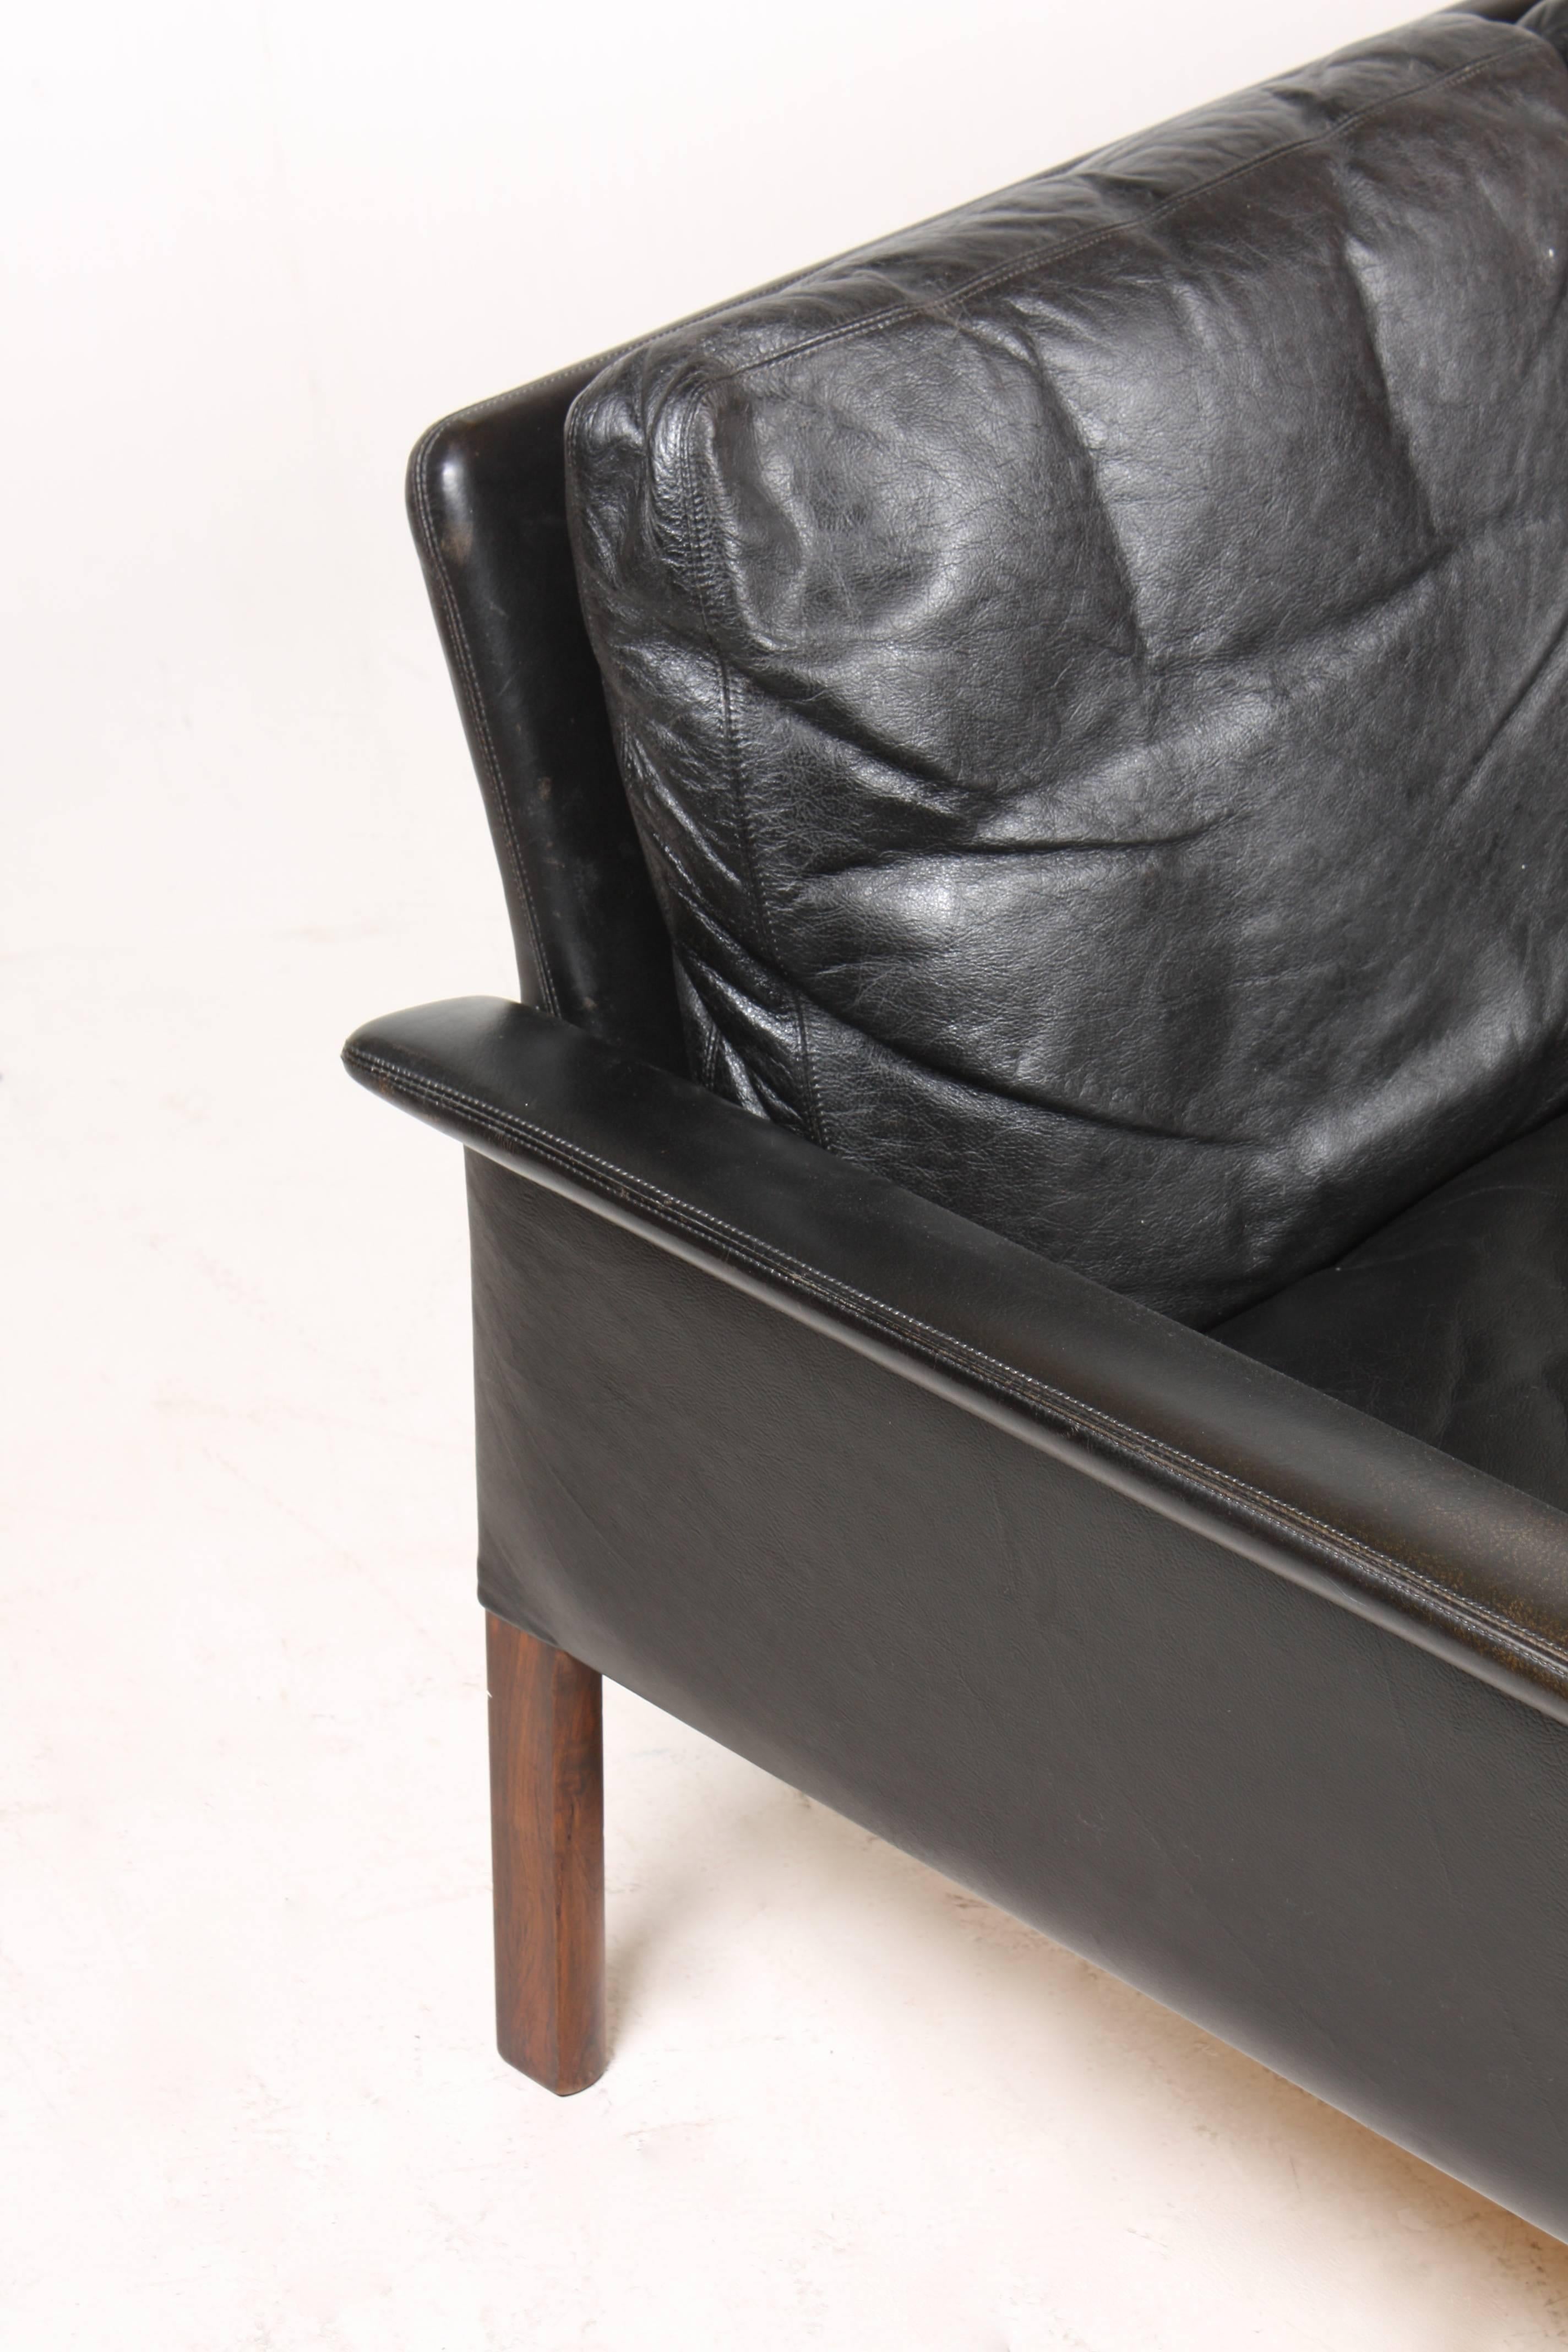 Danish Sofa in Patinated Leather by Hans Olsen